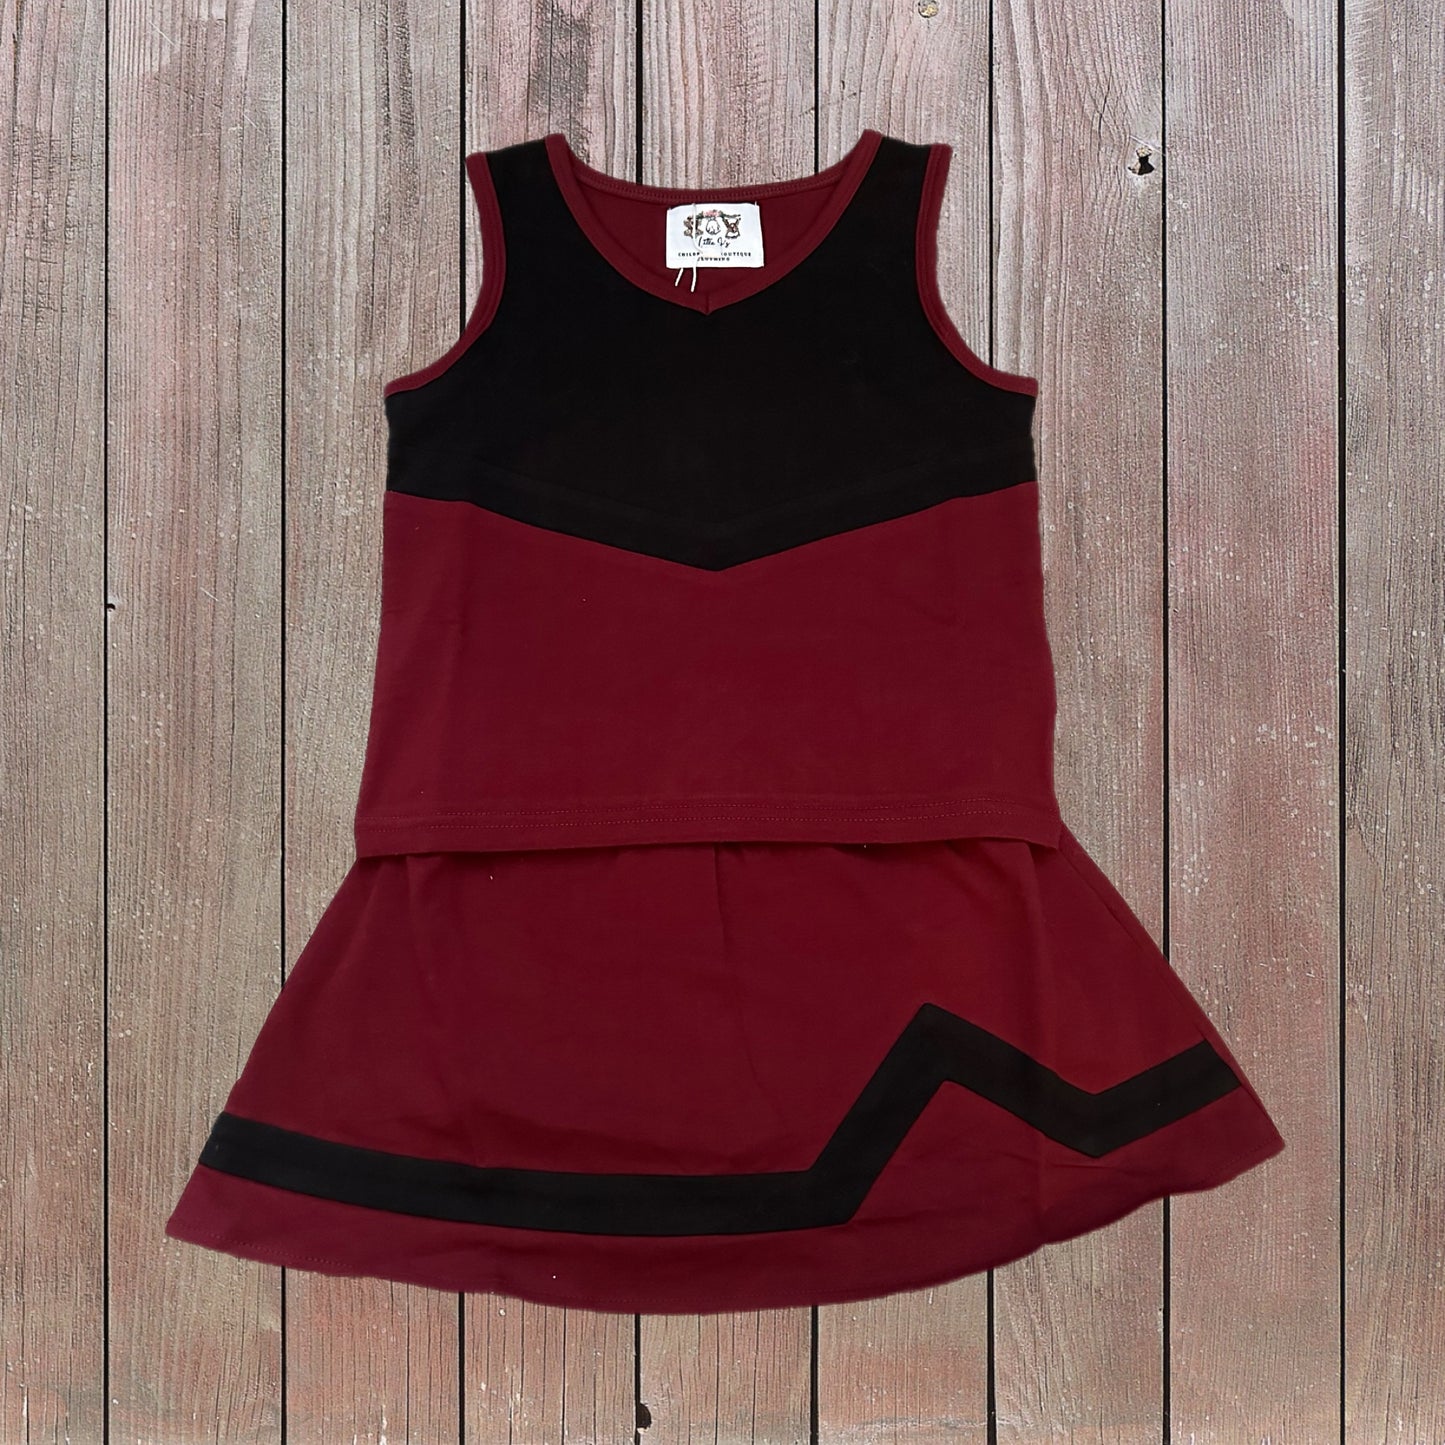 Cheer Outfits Collection Garnet And Black (RTS)